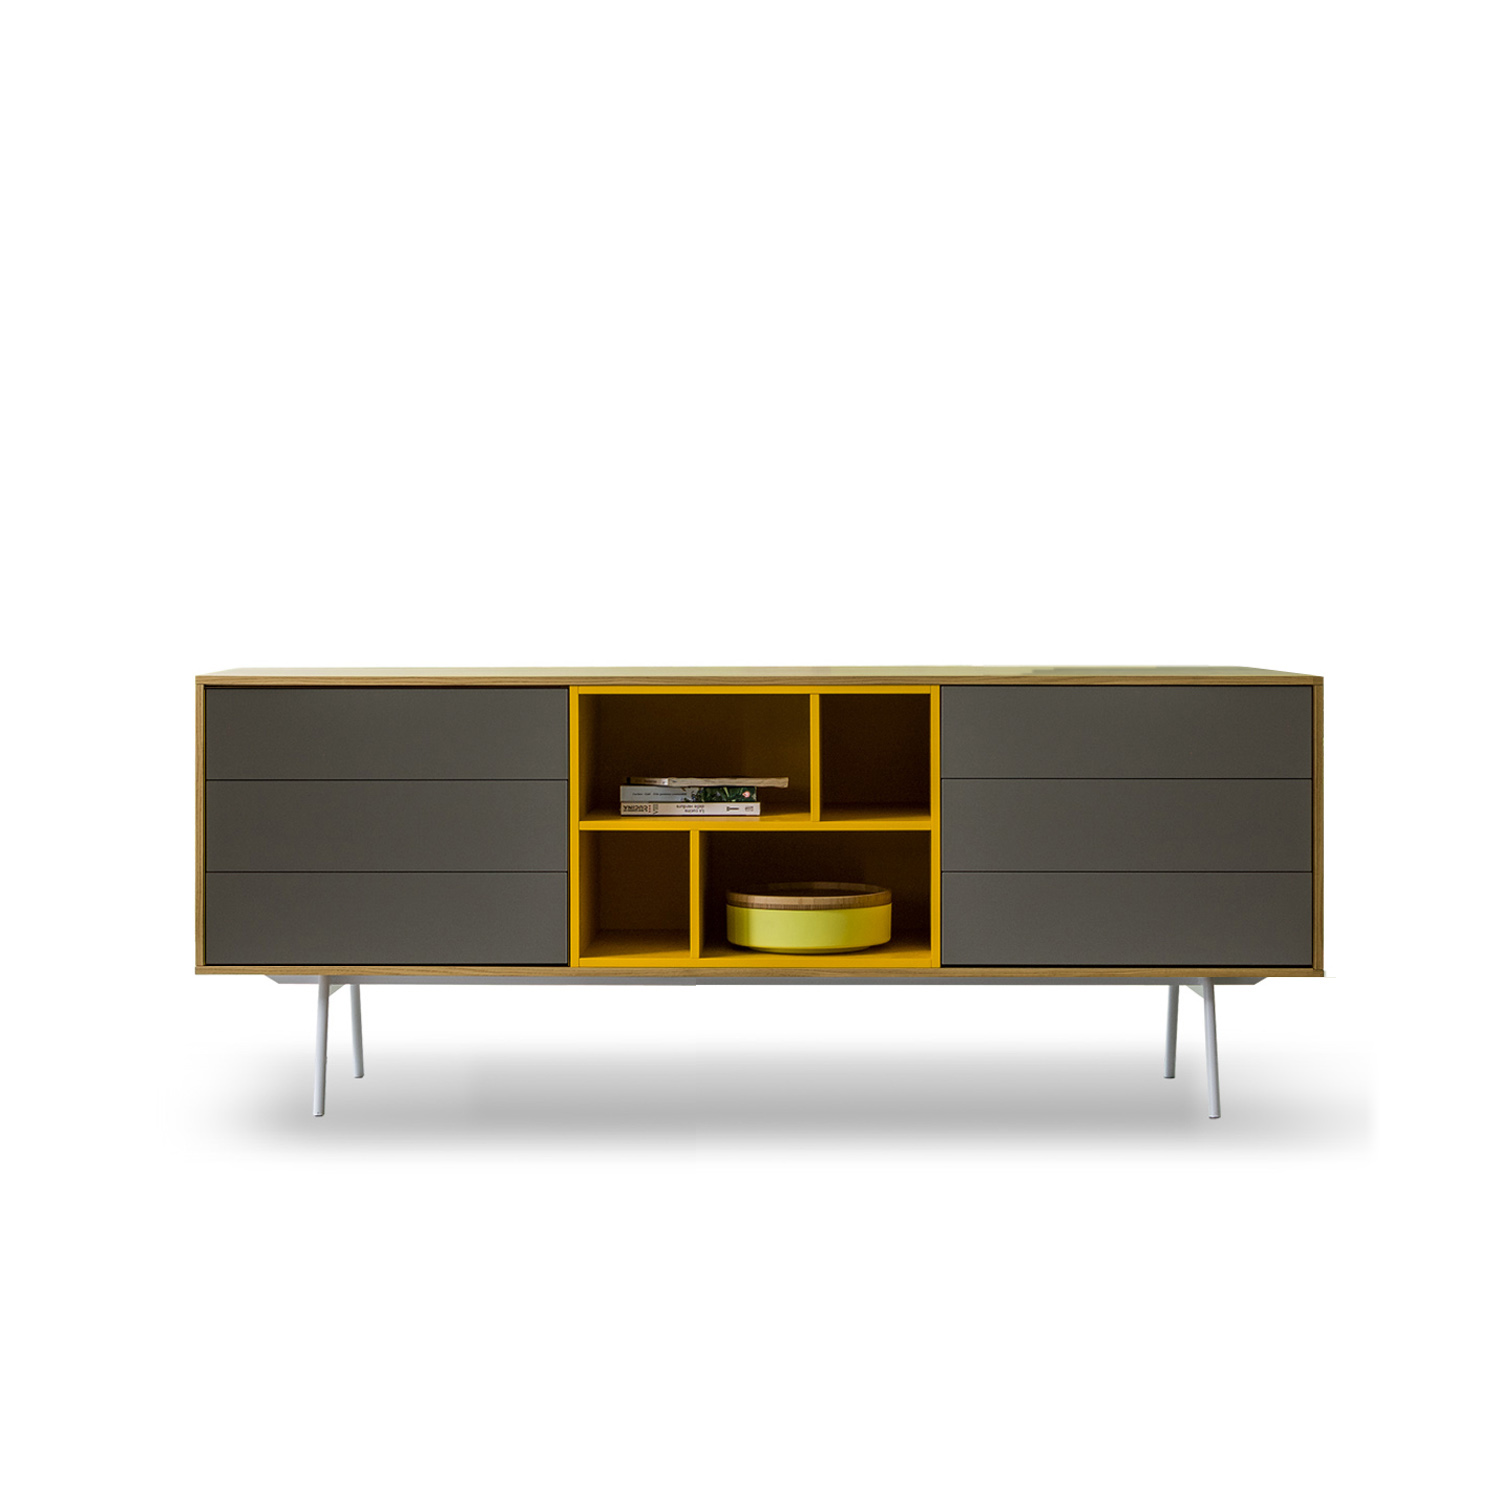 italian-contemporary-furniture-light-open-sideboard-for-dining-and-living-room-by-dallagnese.jpg